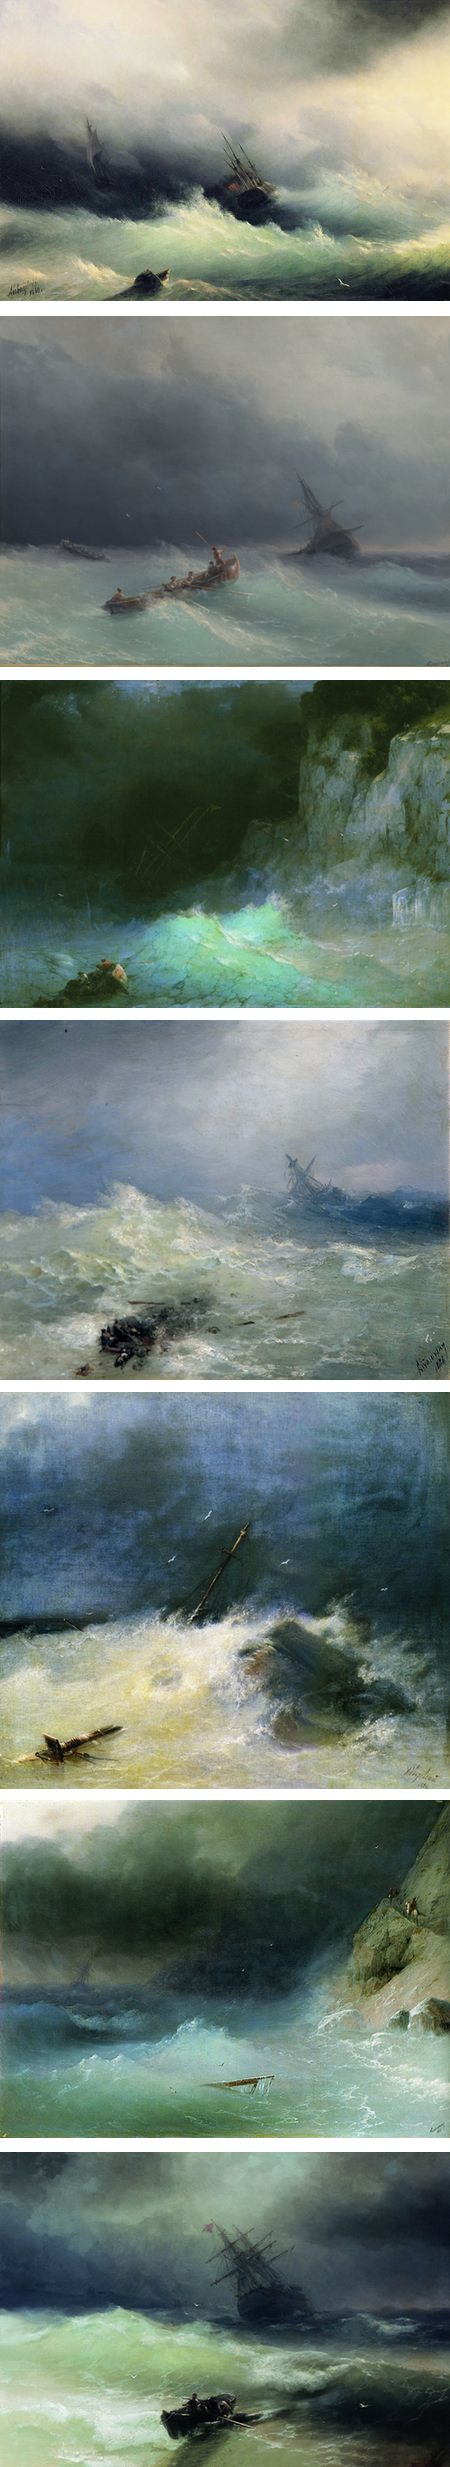 The tempests of Ivan Aivazovsky